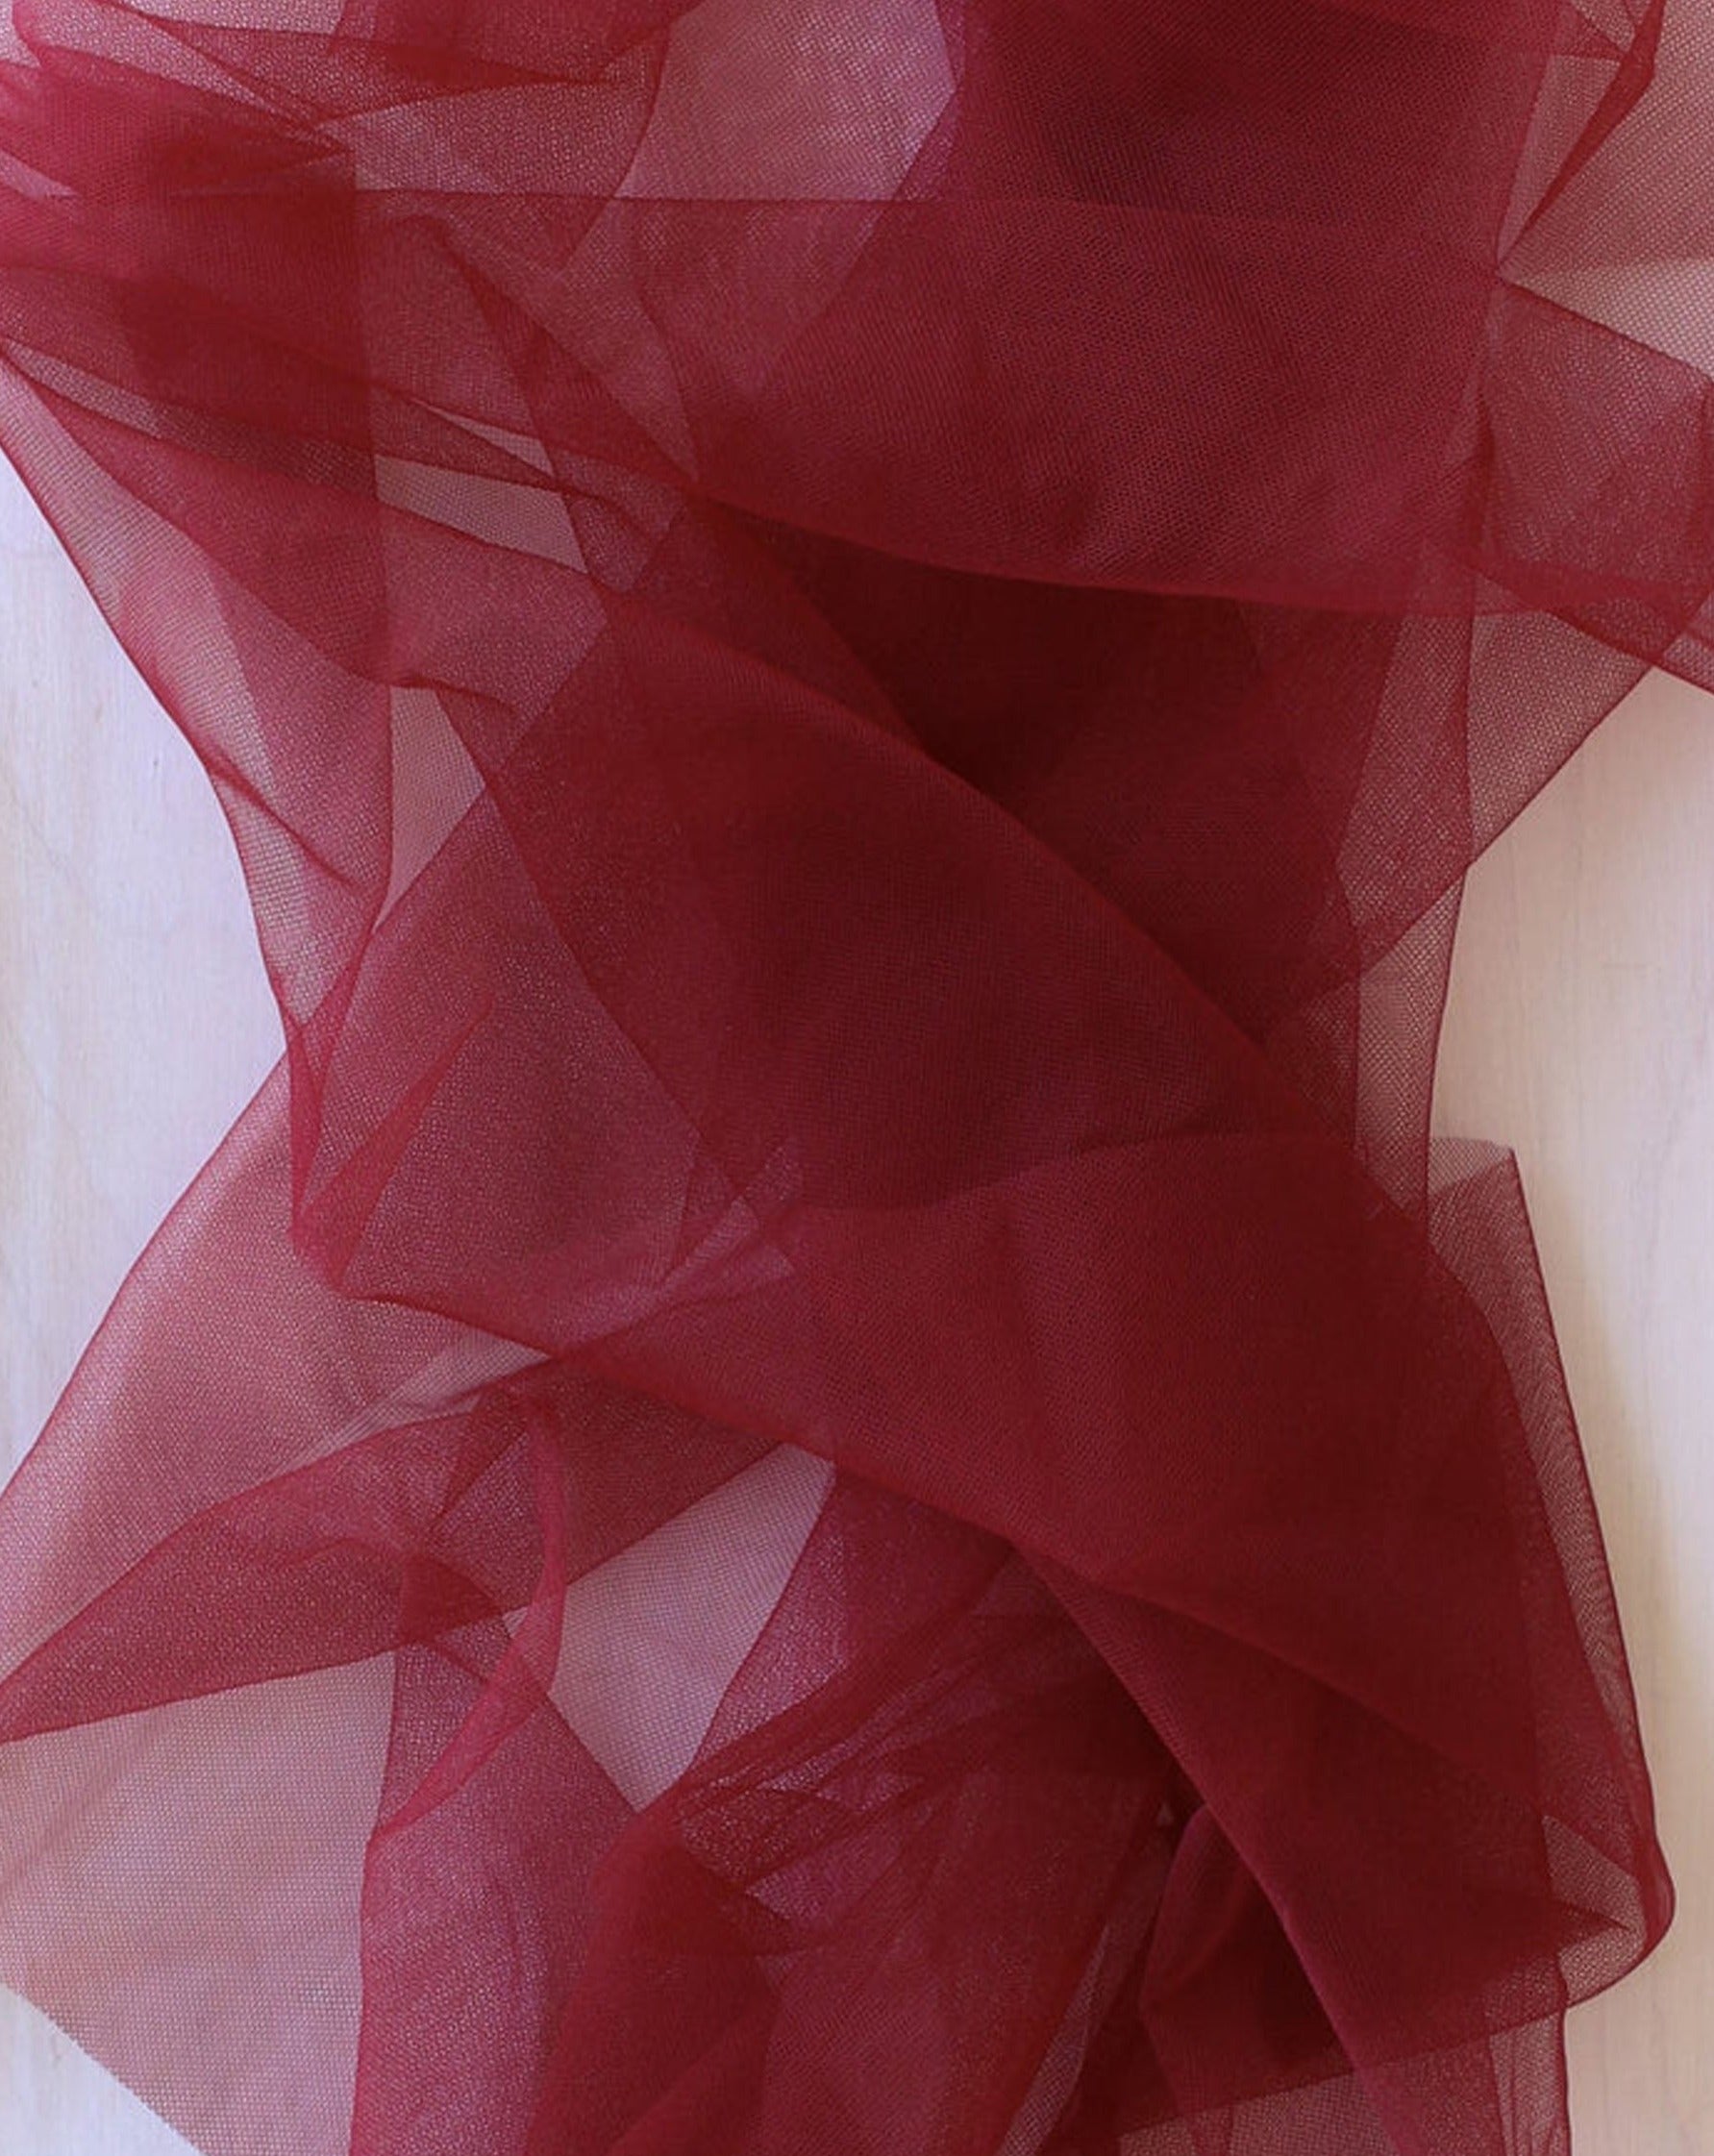 Close up of Rubies Bras black cherry tulle fabric.